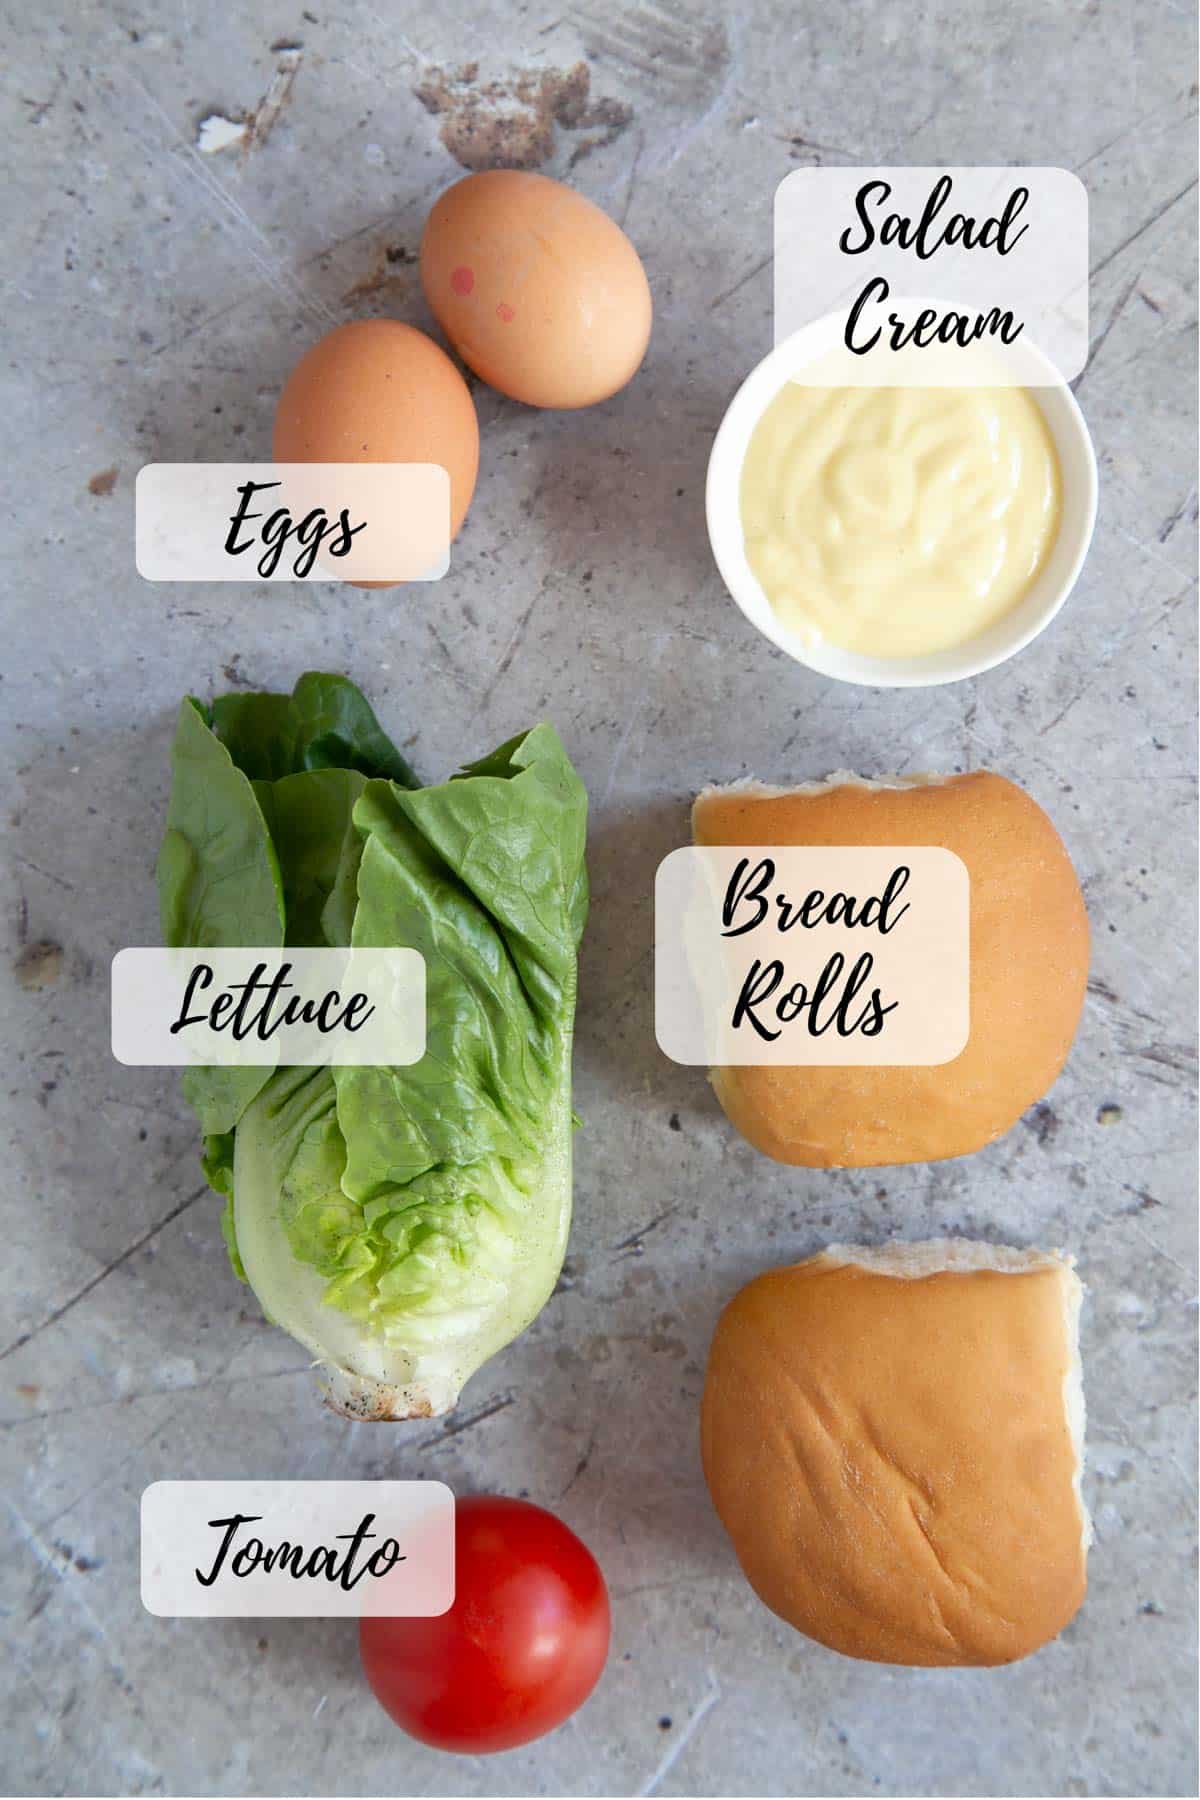 Ingredients for the perfect sandwich: hard boiled eggs, salad cream, soft white rolls, a ripe tomato and lettuce